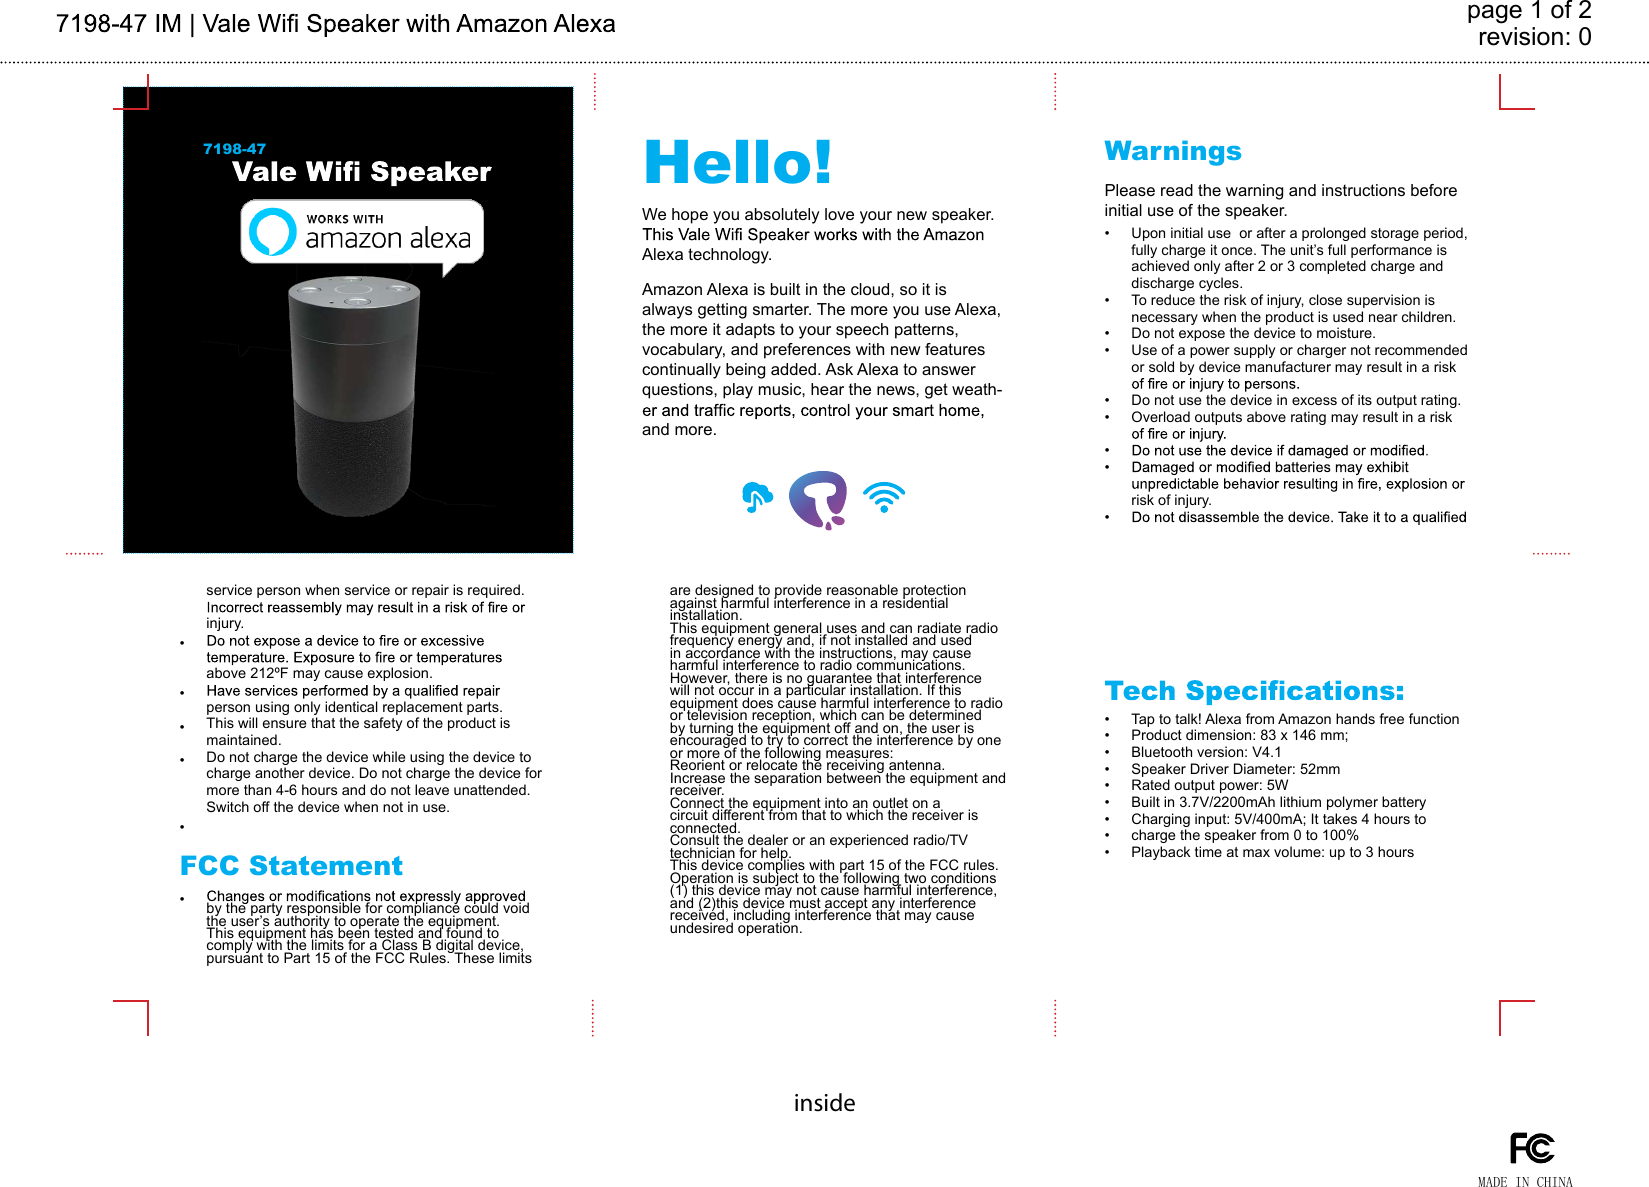 revision: 0page 1 of 2insideHello! WarningsFCC Statement7198-47We hope you absolutely love your new speaker. Alexa technology.Please read the warning and instructions before initial use of the speaker.Upon initial use  or after a prolonged storage period, fully charge it once. The unit’s full performance is achieved only after 2 or 3 completed charge and discharge cycles.To reduce the risk of injury, close supervision is necessary when the product is used near children.Do not expose the device to moisture.Use of a power supply or charger not recommended or sold by device manufacturer may result in a risk Do not use the device in excess of its output rating. Overload outputs above rating may result in a risk risk of injury.Tap to talk! Alexa from Amazon hands free functionProduct dimension: 83 x 146 mm; Bluetooth version: V4.1Speaker Driver Diameter: 52mmRated output power: 5WBuilt in 3.7V/2200mAh lithium polymer battery Charging input: 5V/400mA; It takes 4 hours to charge the speaker from 0 to 100%Playback time at max volume: up to 3 hoursby the party responsible for compliance could void the user’s authority to operate the equipment. This equipment has been tested and found to comply with the limits for a Class B digital device, pursuant to Part 15 of the FCC Rules. These limits are designed to provide reasonable protection against harmful interference in a residential installation. This equipment general uses and can radiate radio frequency energy and, if not installed and used in accordance with the instructions, may cause harmful interference to radio communications. However, there is no guarantee that interference will not occur in a particular installation. If this equipment does cause harmful interference to radio or television reception, which can be determined by turning the equipment off and on, the user is encouraged to try to correct the interference by one or more of the following measures:Reorient or relocate the receiving antenna.Increase the separation between the equipment and receiver. Connect the equipment into an outlet on a circuit different from that to which the receiver is connected. Consult the dealer or an experienced radio/TV technician for help.This device complies with part 15 of the FCC rules. Operation is subject to the following two conditions (1) this device may not cause harmful interference, and (2)this device must accept any interference received, including interference that may cause undesired operation.MADE IN CHINAservice person when service or repair is required. injury.above 212ºF may cause explosion. person using only identical replacement parts. This will ensure that the safety of the product is maintained.Do not charge the device while using the device to charge another device. Do not charge the device for more than 4-6 hours and do not leave unattended.Switch off the device when not in use.••••••••••••••••••••••••Amazon Alexa is built in the cloud, so it is always getting smarter. The more you use Alexa, the more it adapts to your speech patterns, vocabulary, and preferences with new features continually being added. Ask Alexa to answer questions, play music, hear the news, get weath-and more.